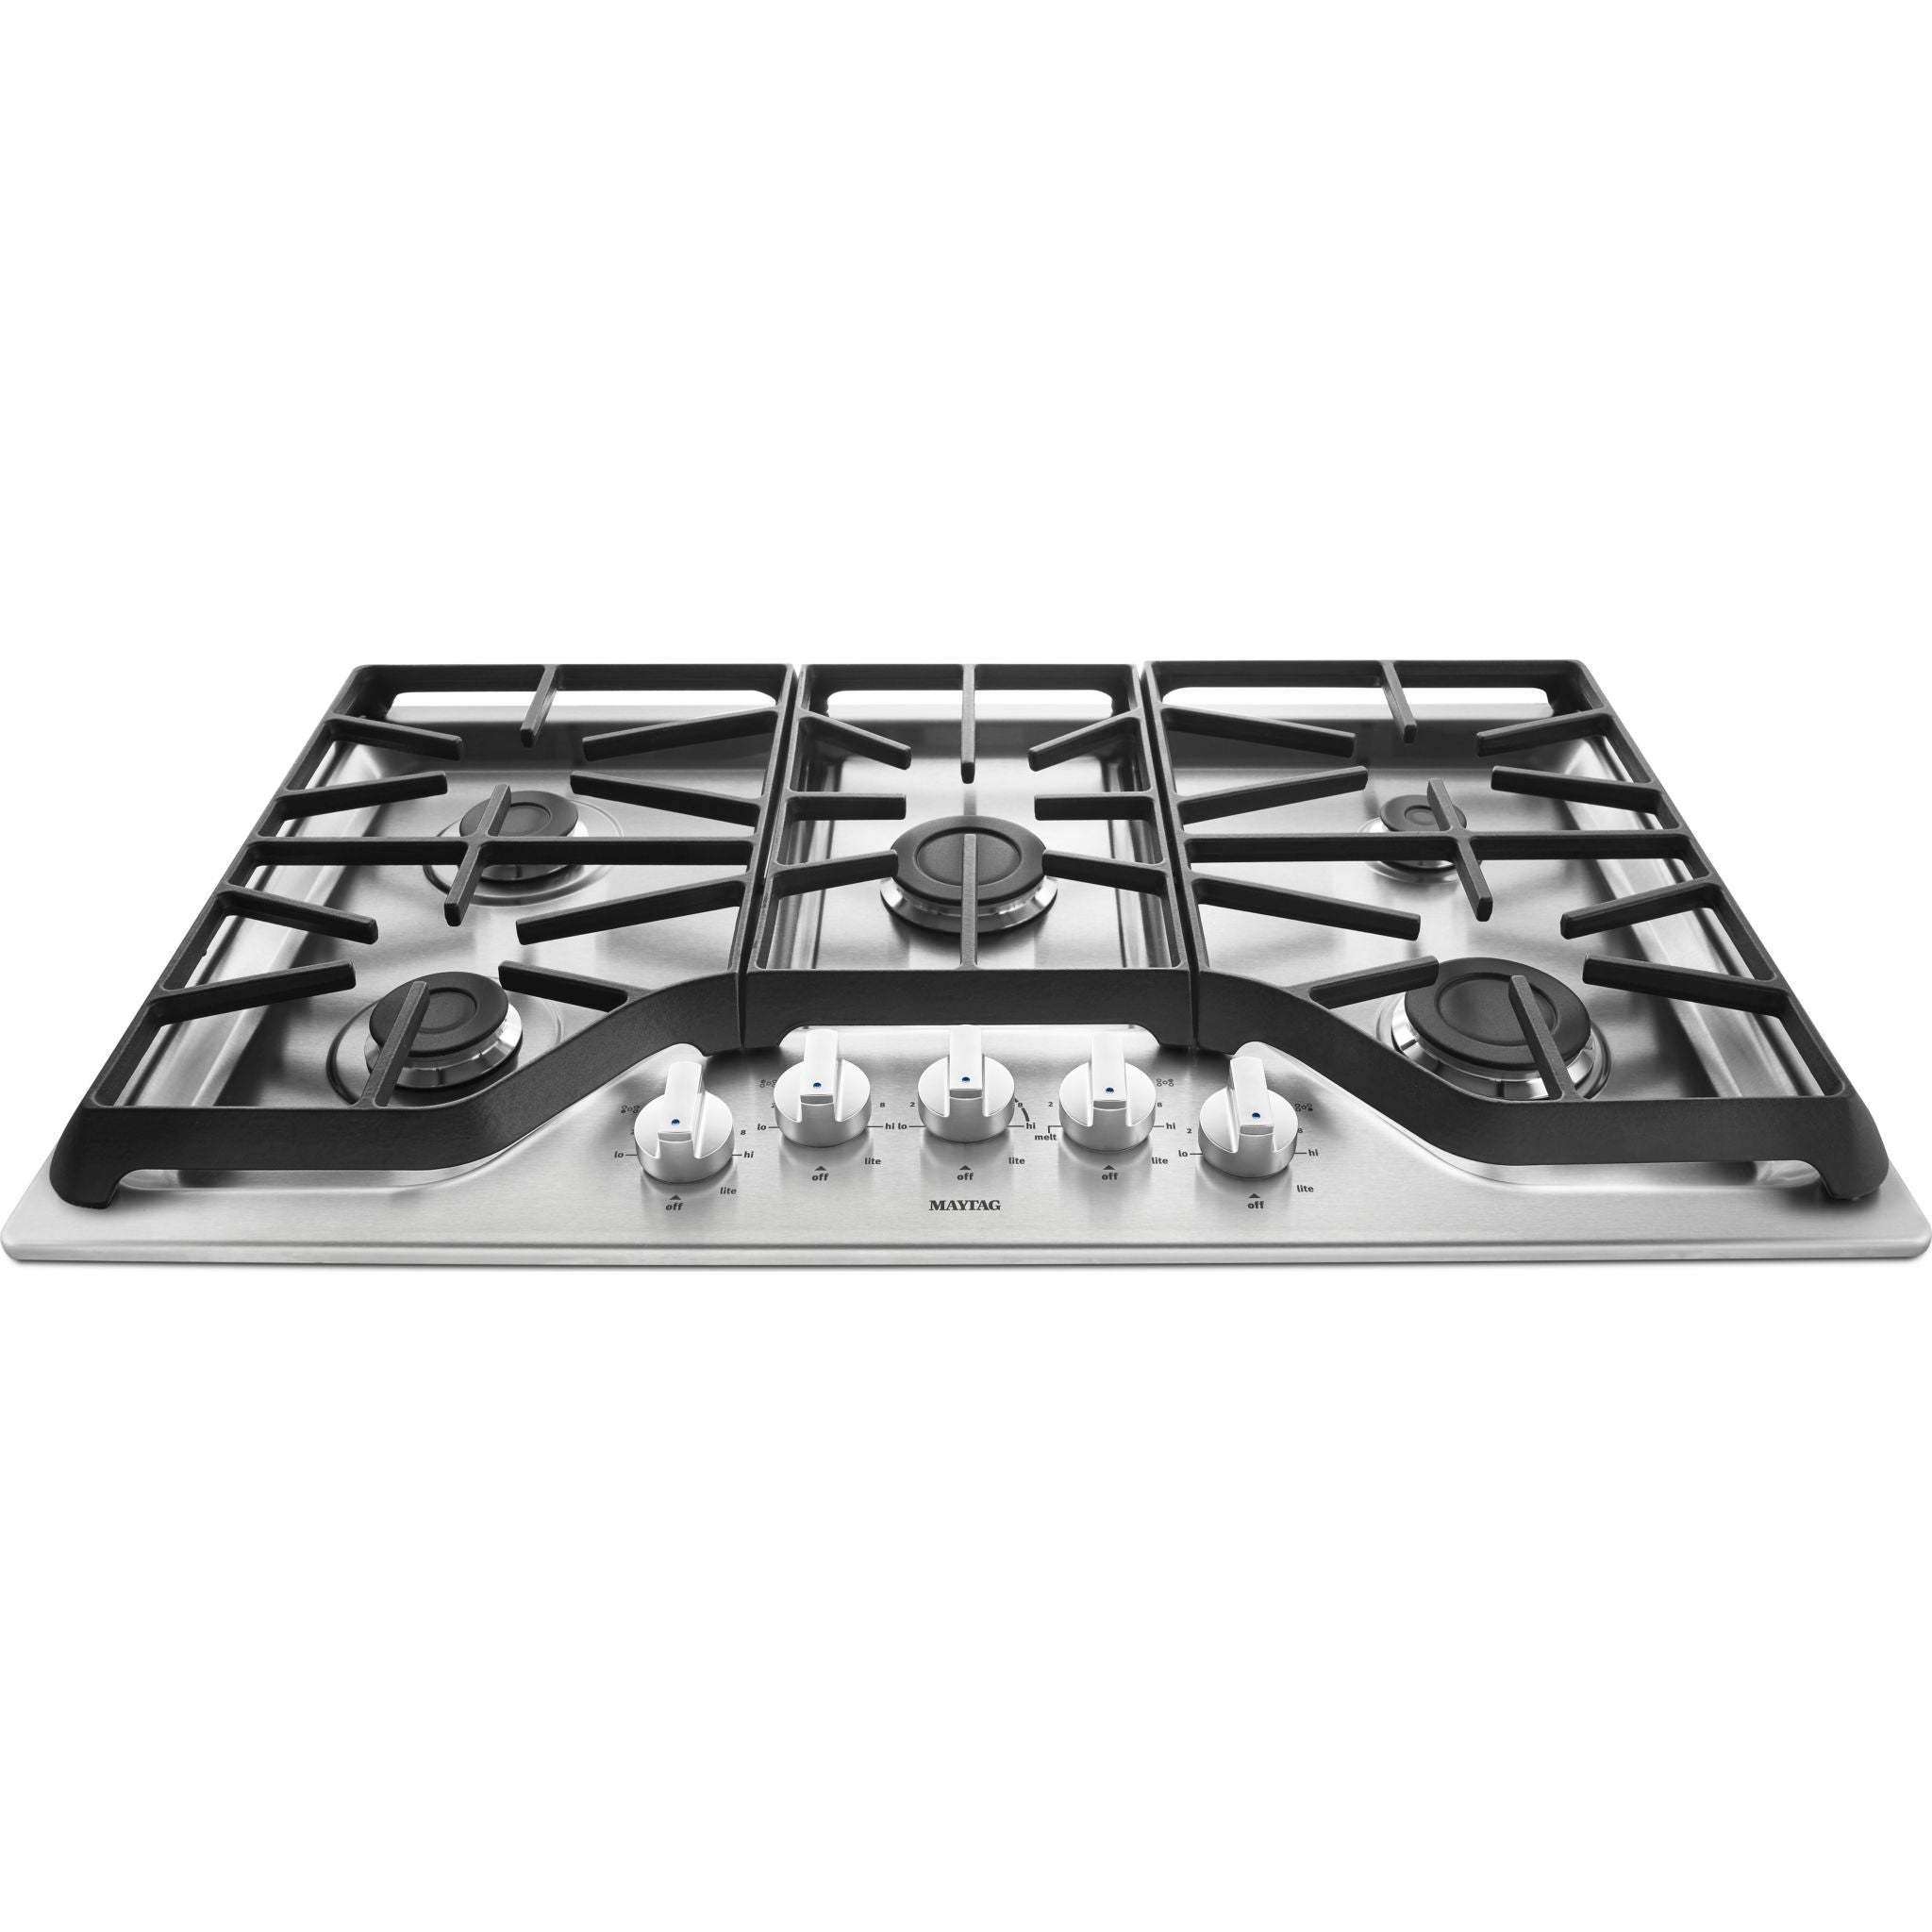 Maytag, Maytag 36" Gas Cooktop (MGC7536DS) - Stainless Steel